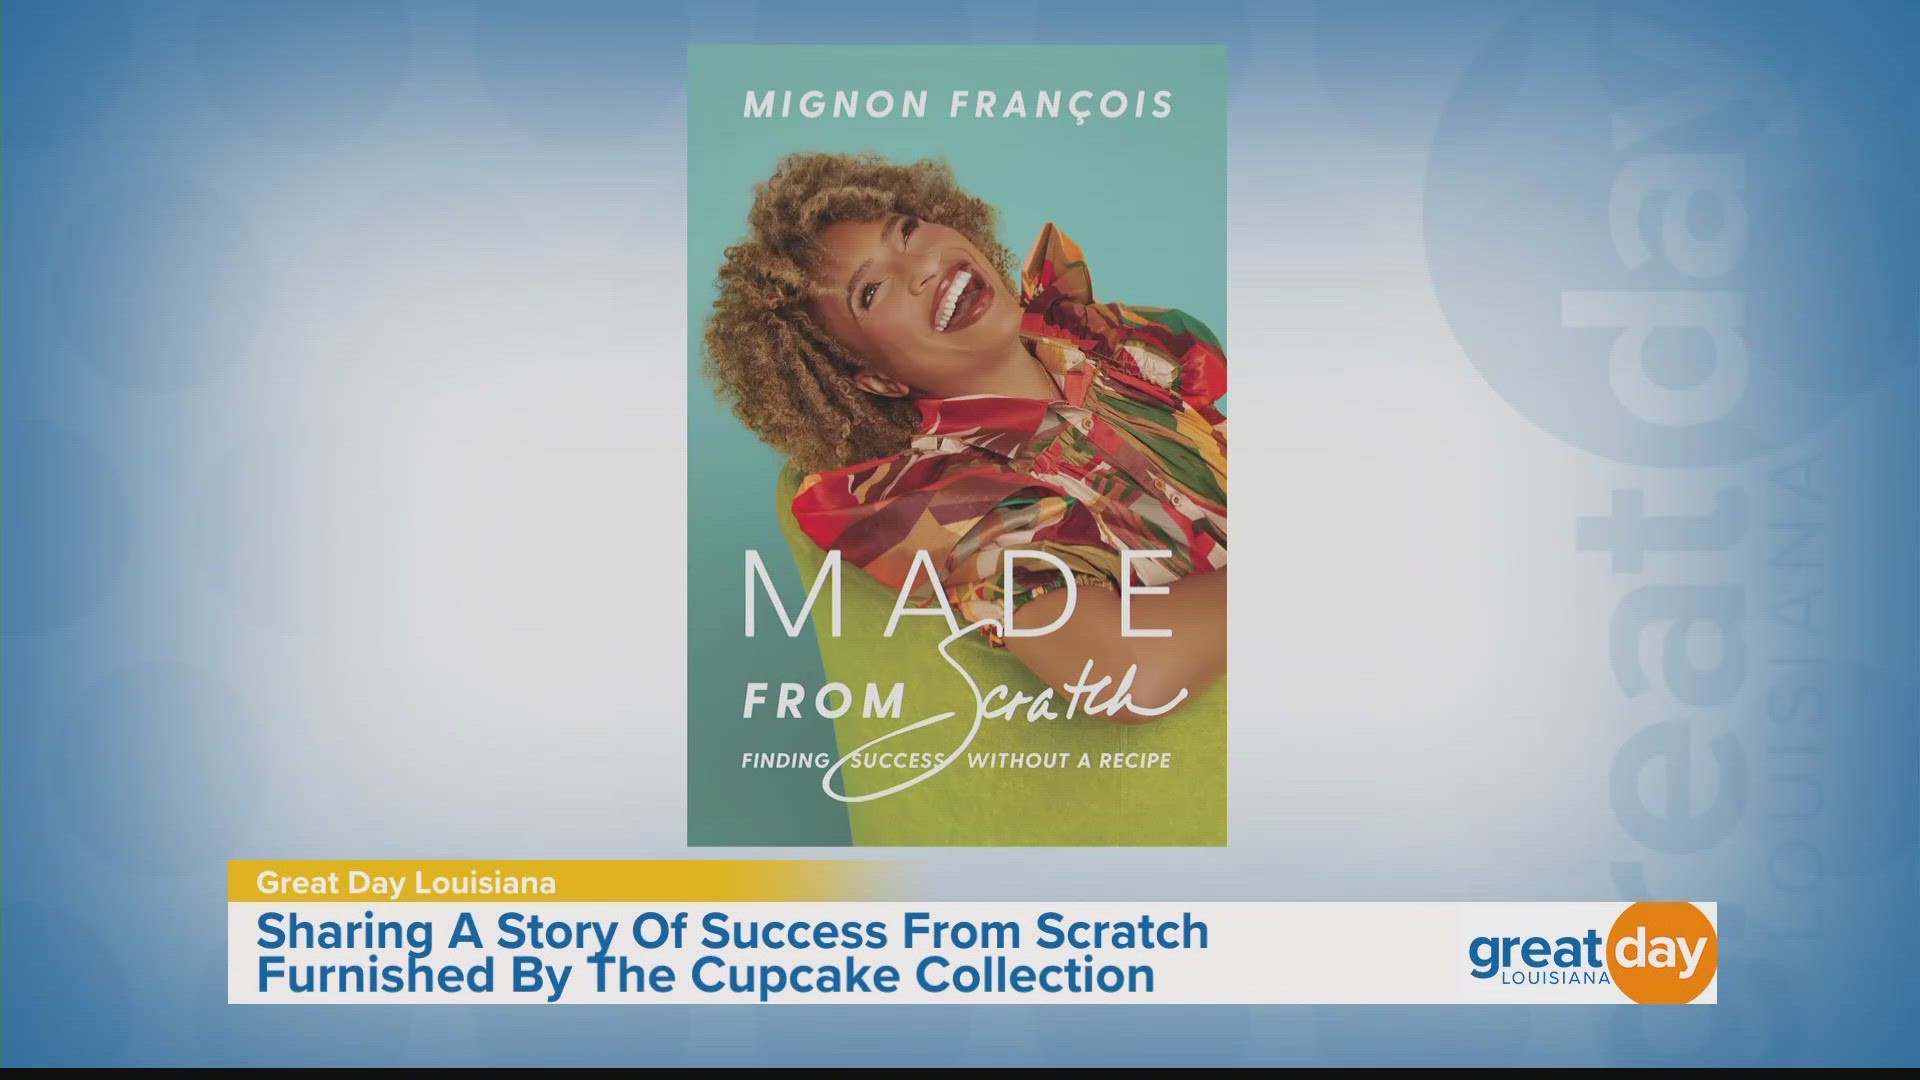 Mignon Francois of The Cupcake Collection shares her tips for success in a new memoir.